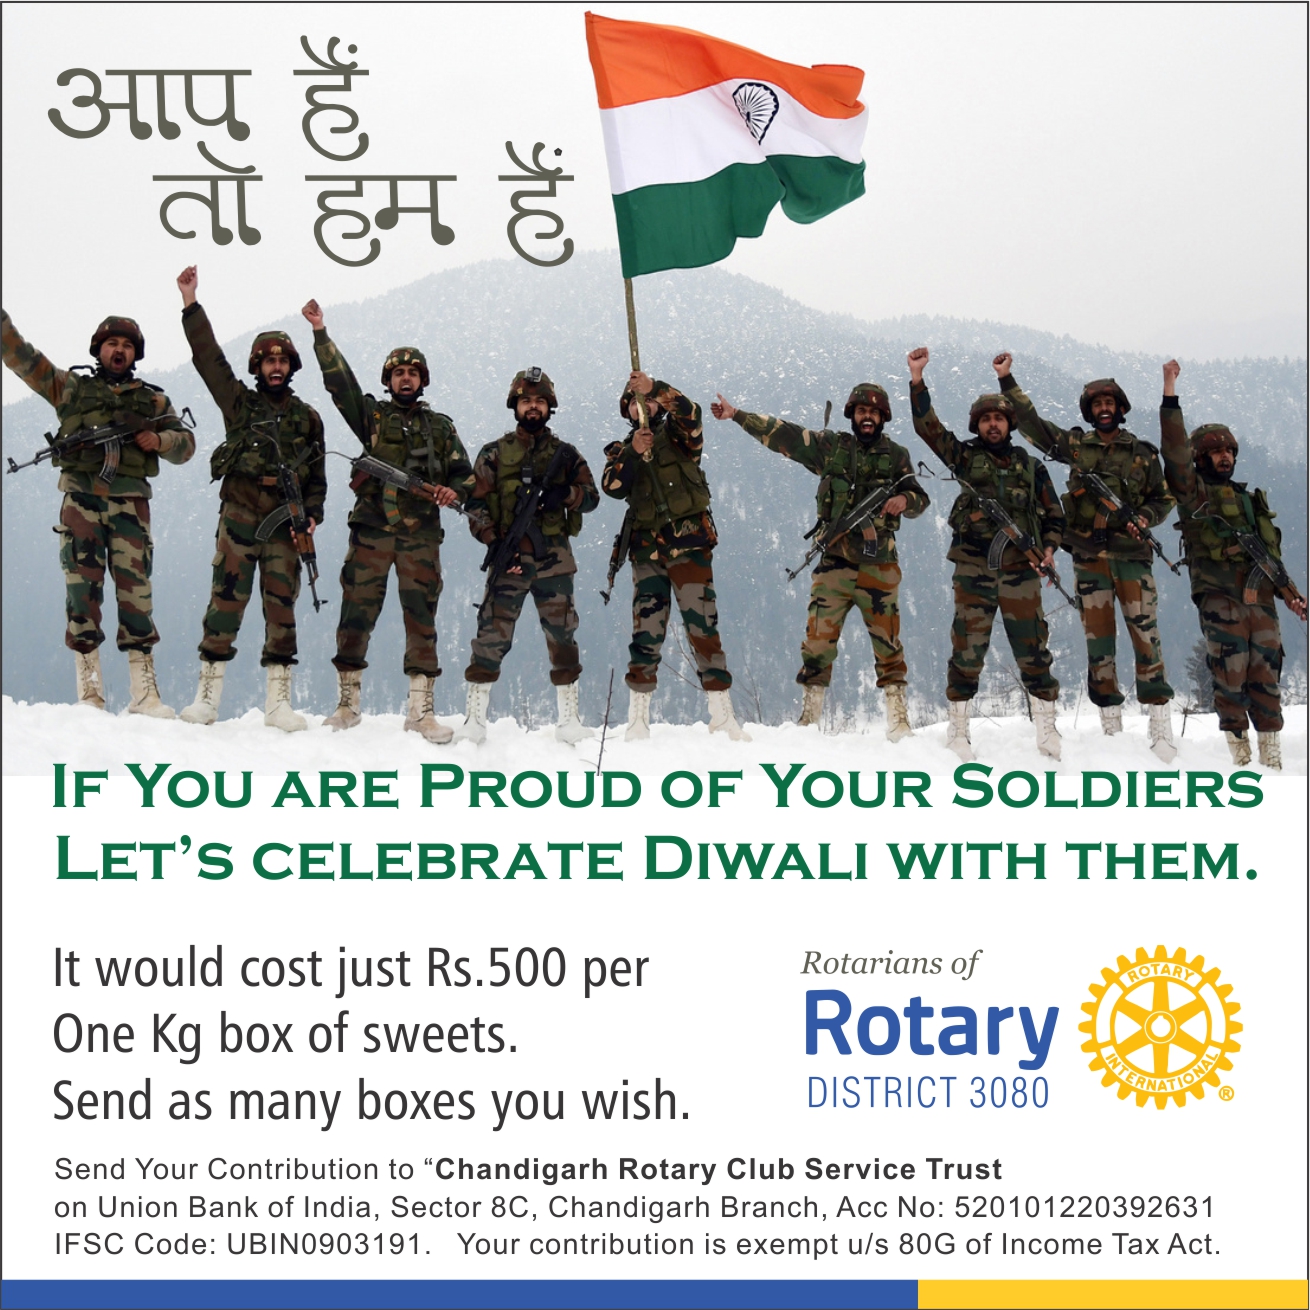 How do you salute the jawans for their dedication and service to the nation?, Rotarians to celebrate Diwali with jawans on border this season again.